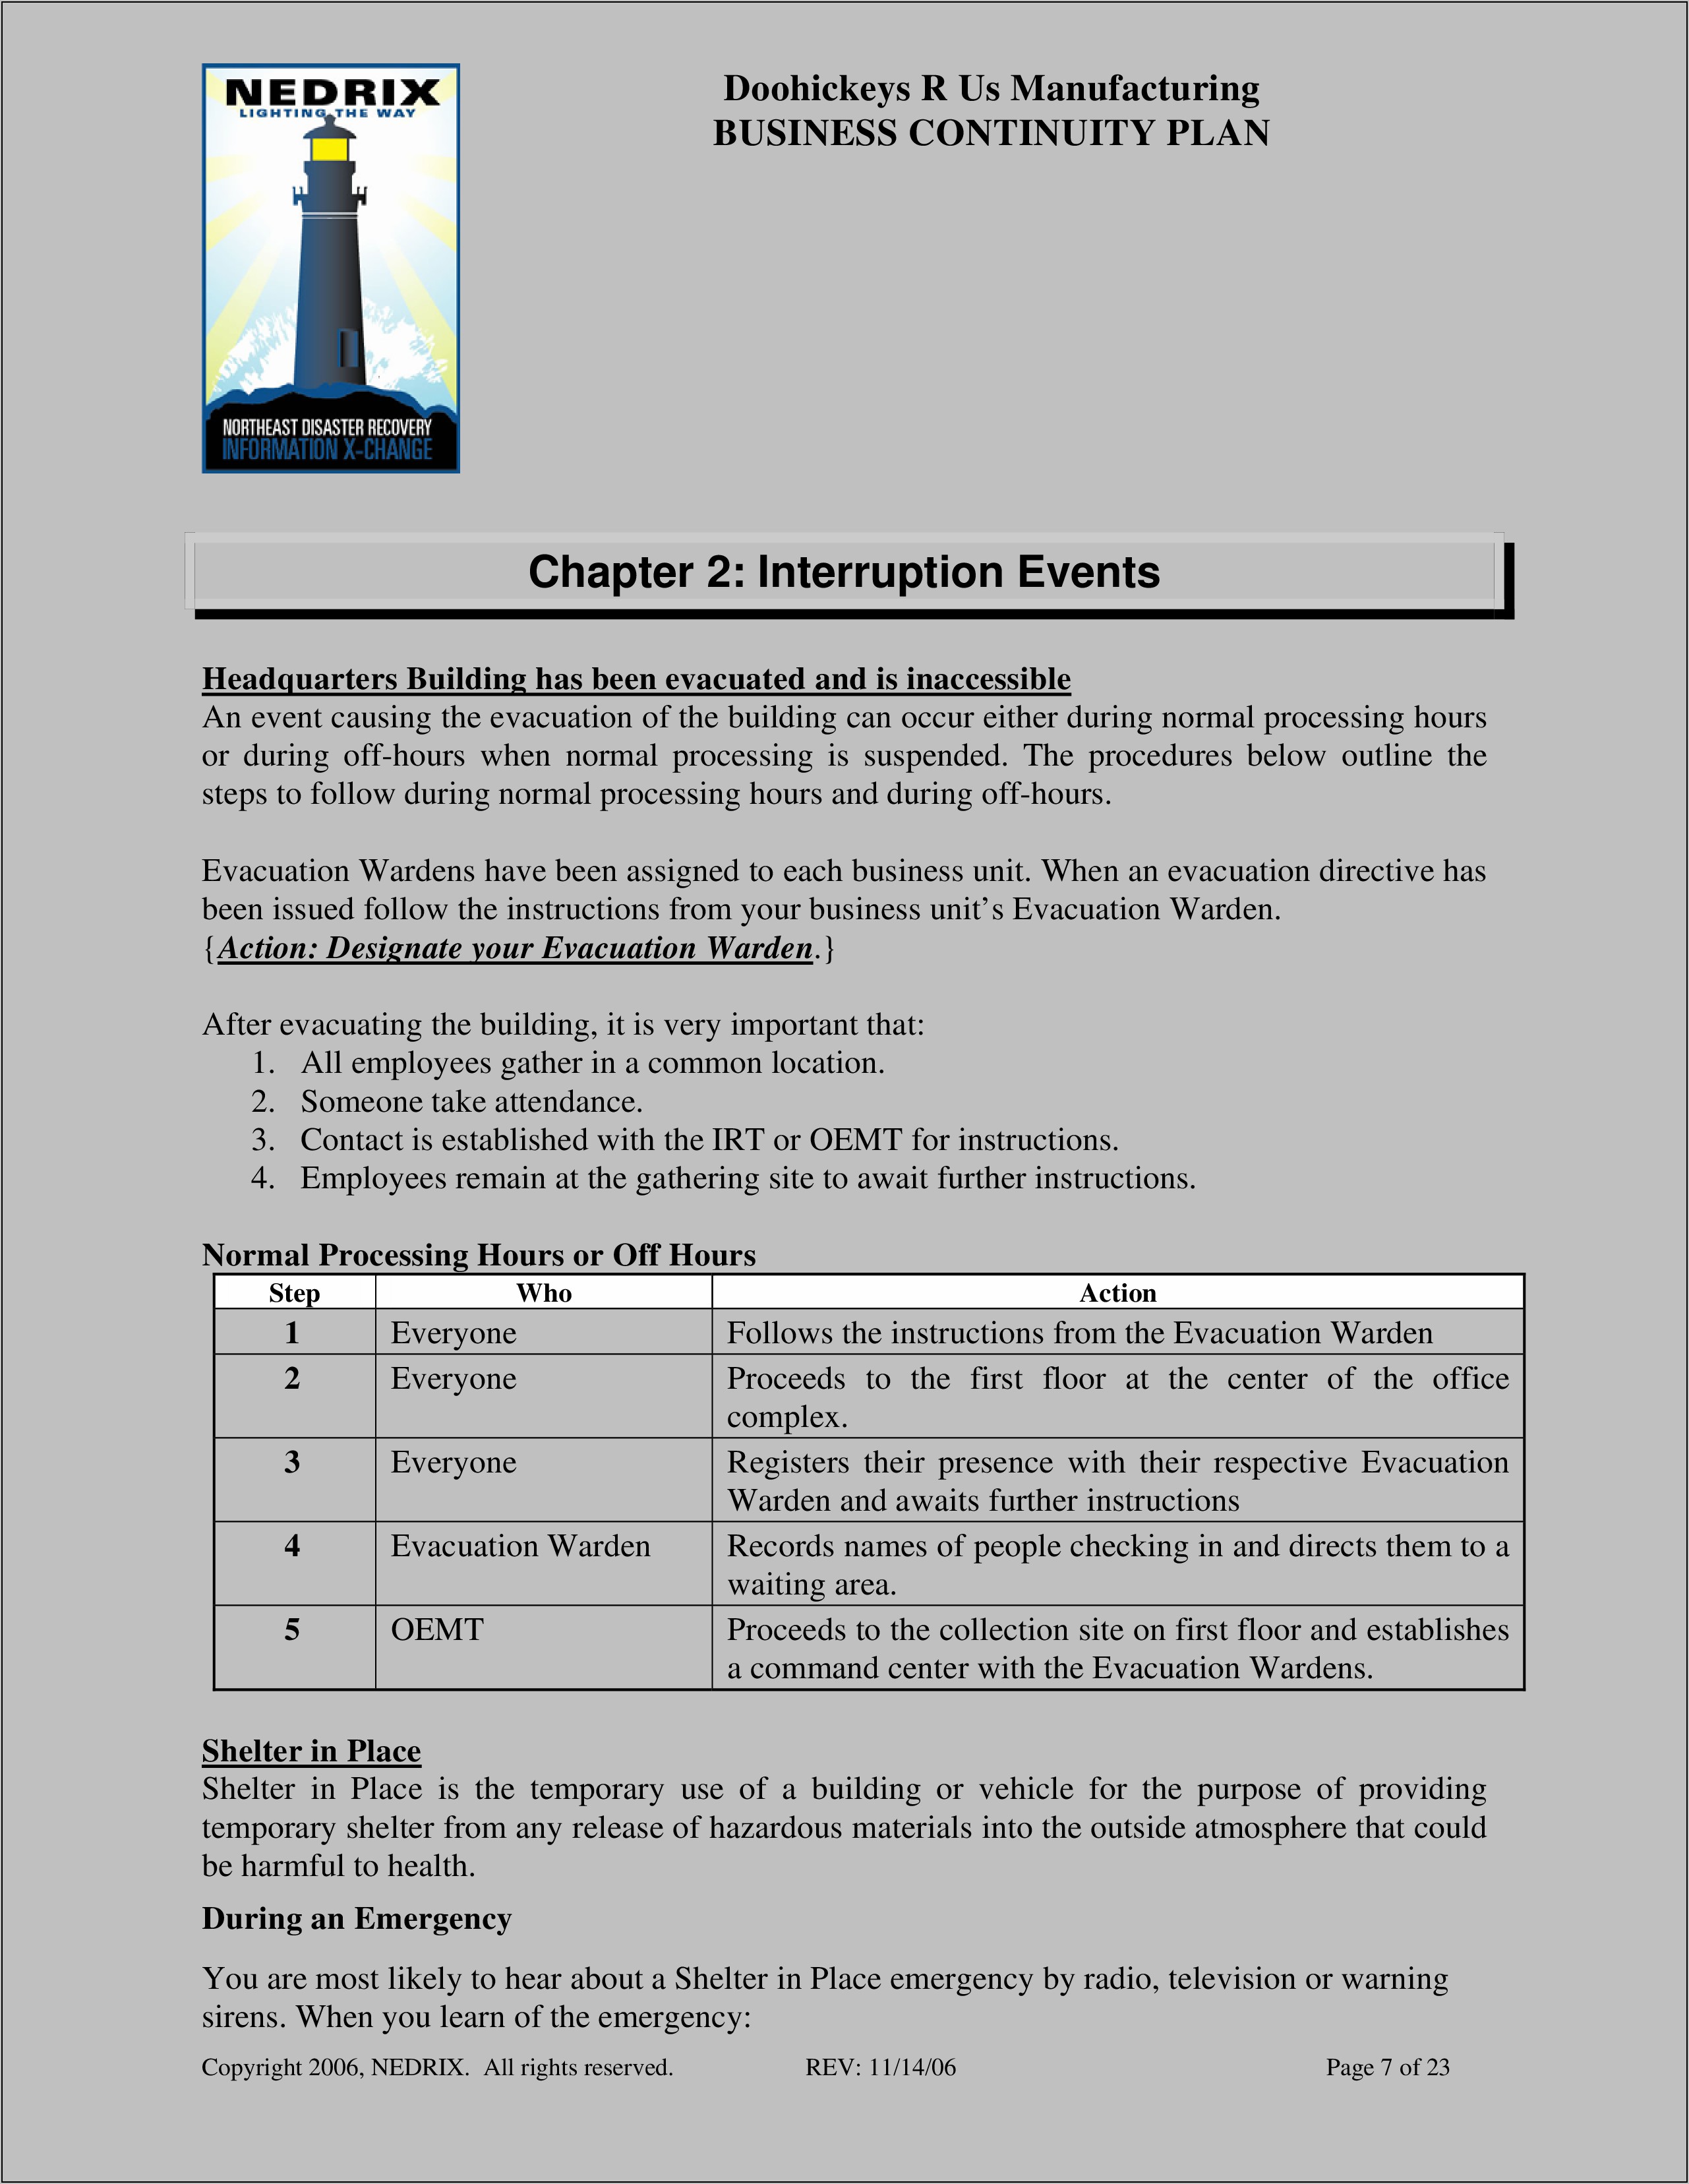 Business Continuity Plan Template For Manufacturing Pdf